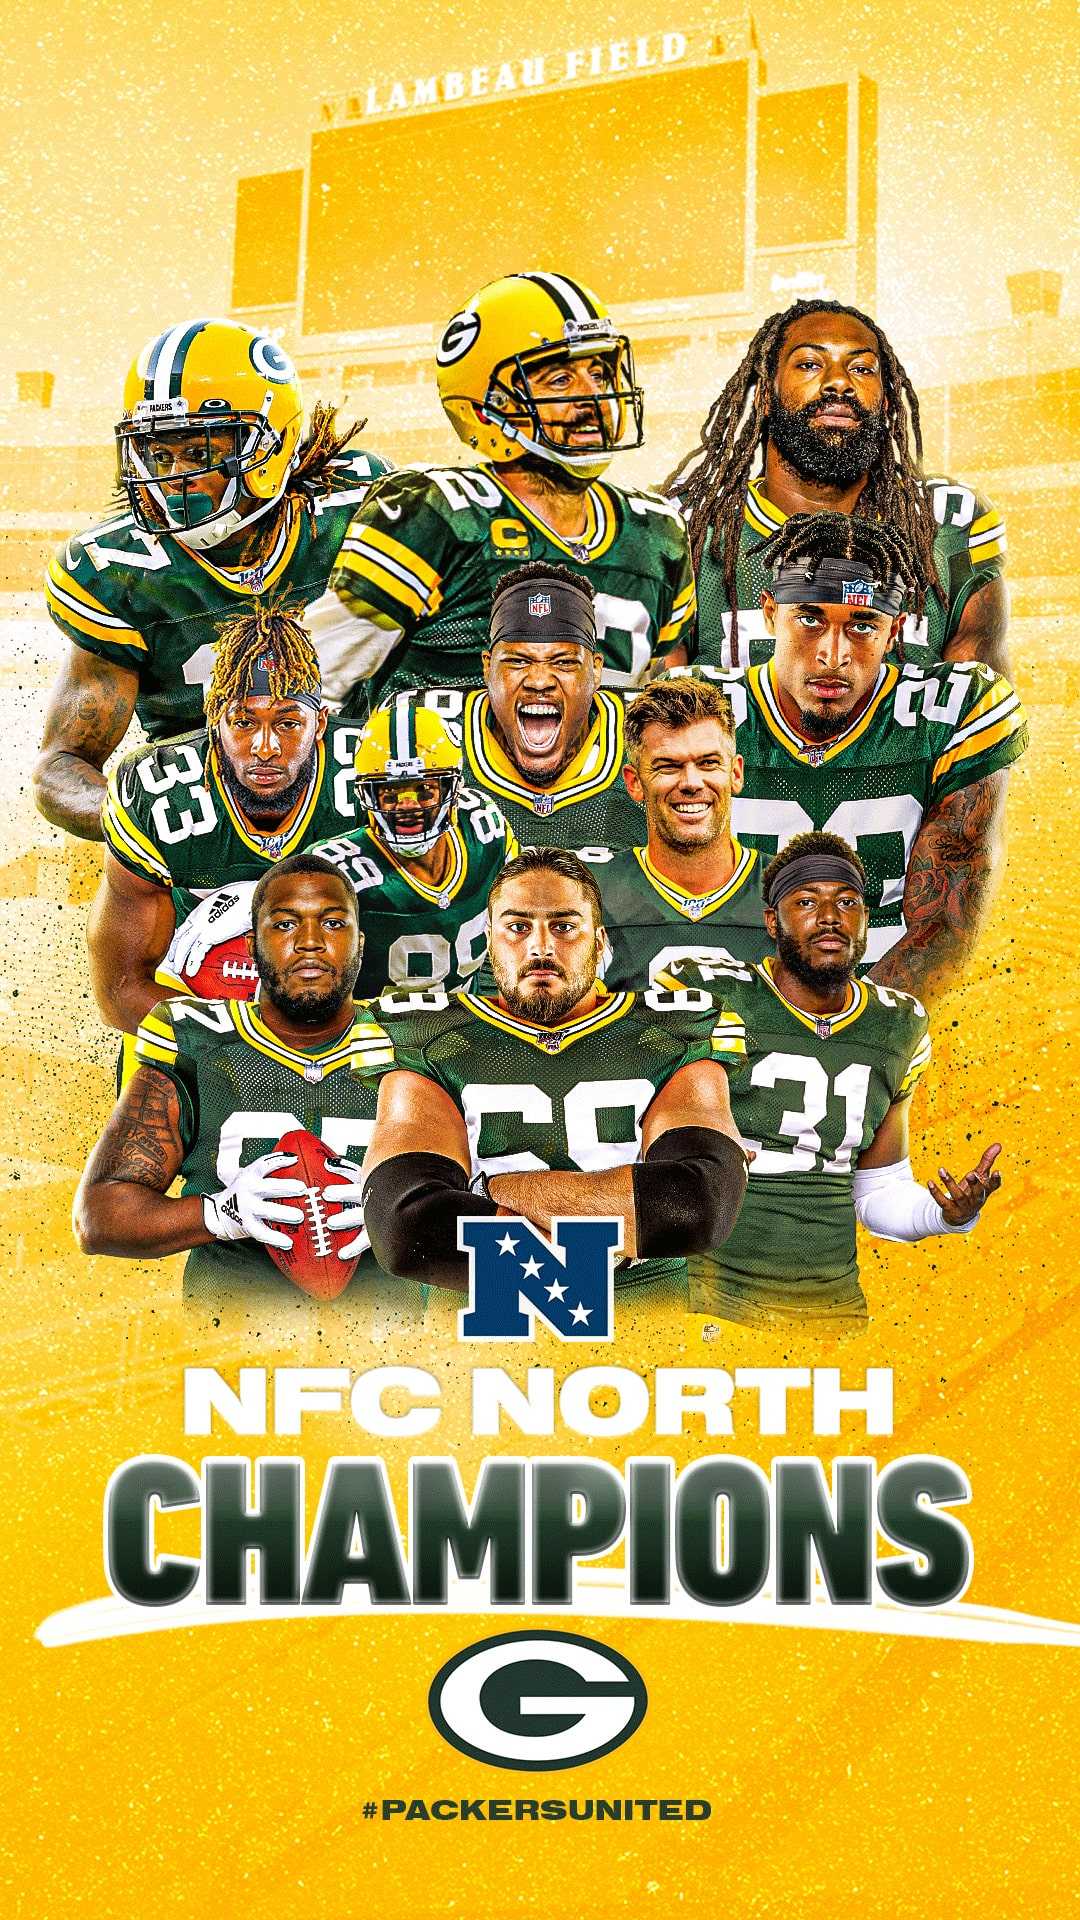 Packers-NFC-North-Champions-Wallpaper